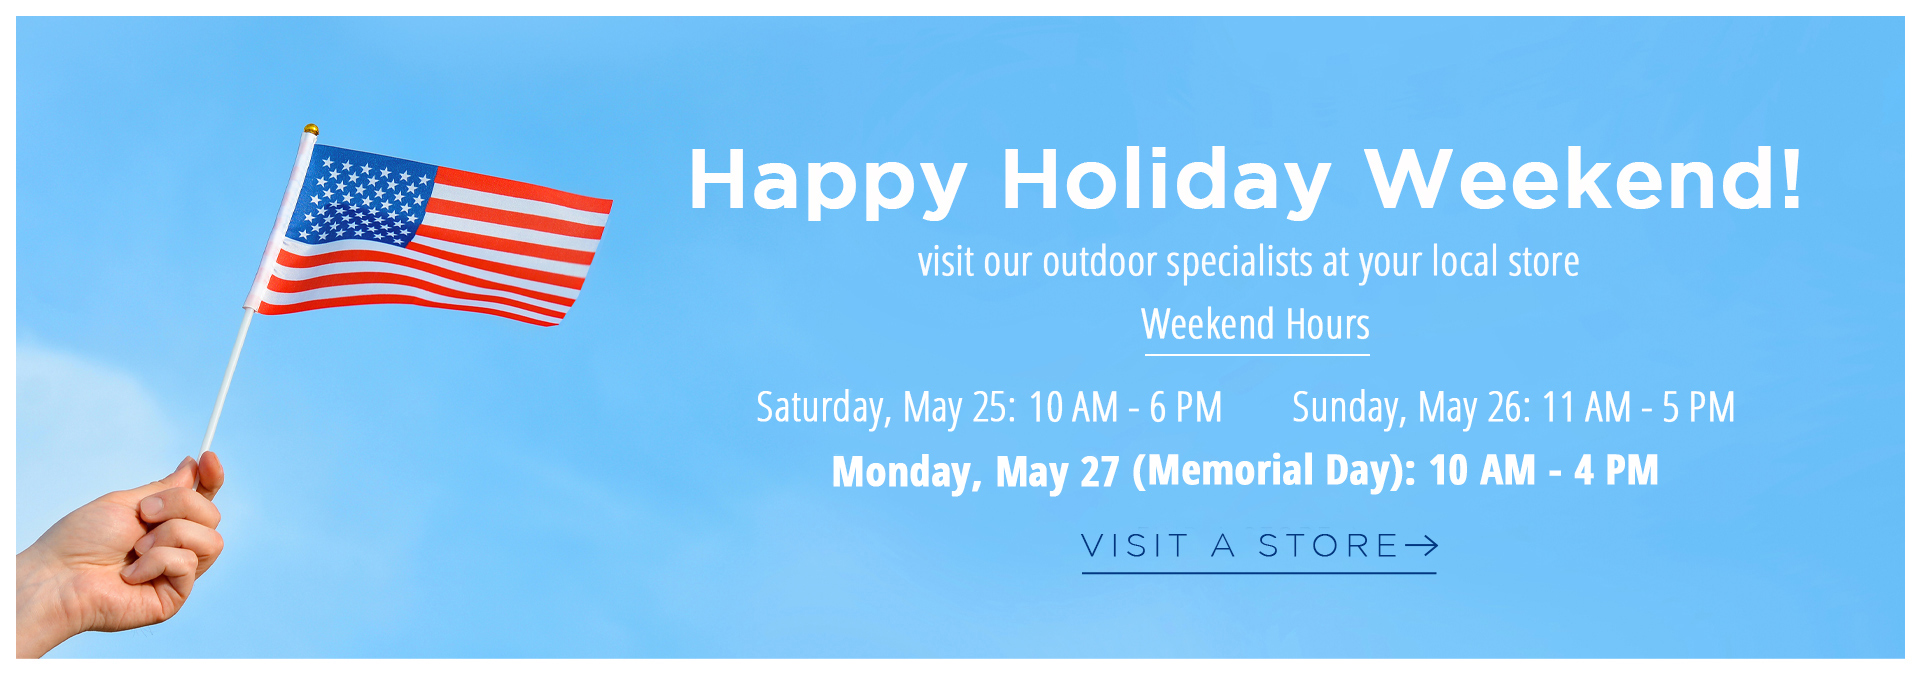  Visit our stores on Memorial Day during our holiday hours to start your summer off right!